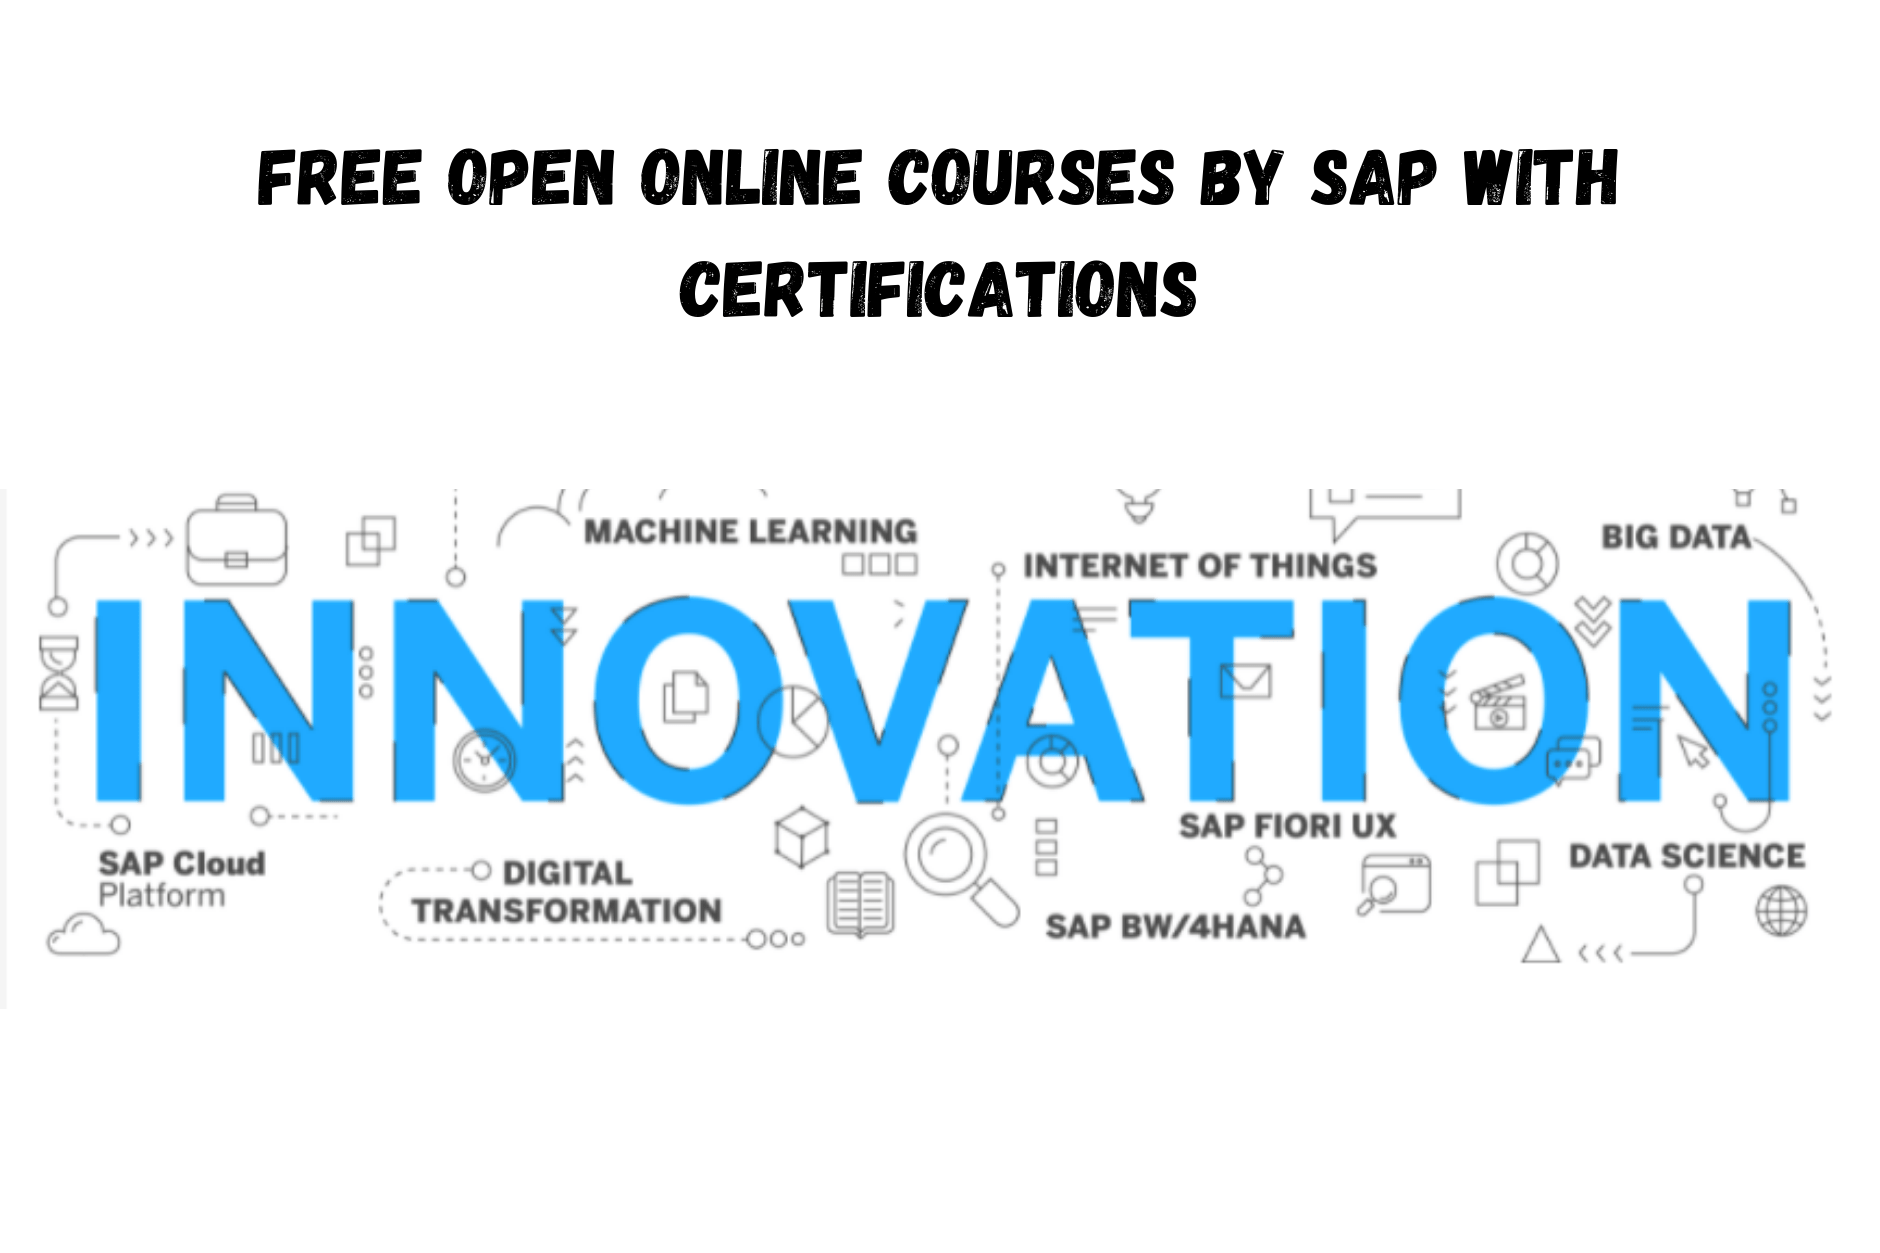 Free Open online courses by SAP with certifications